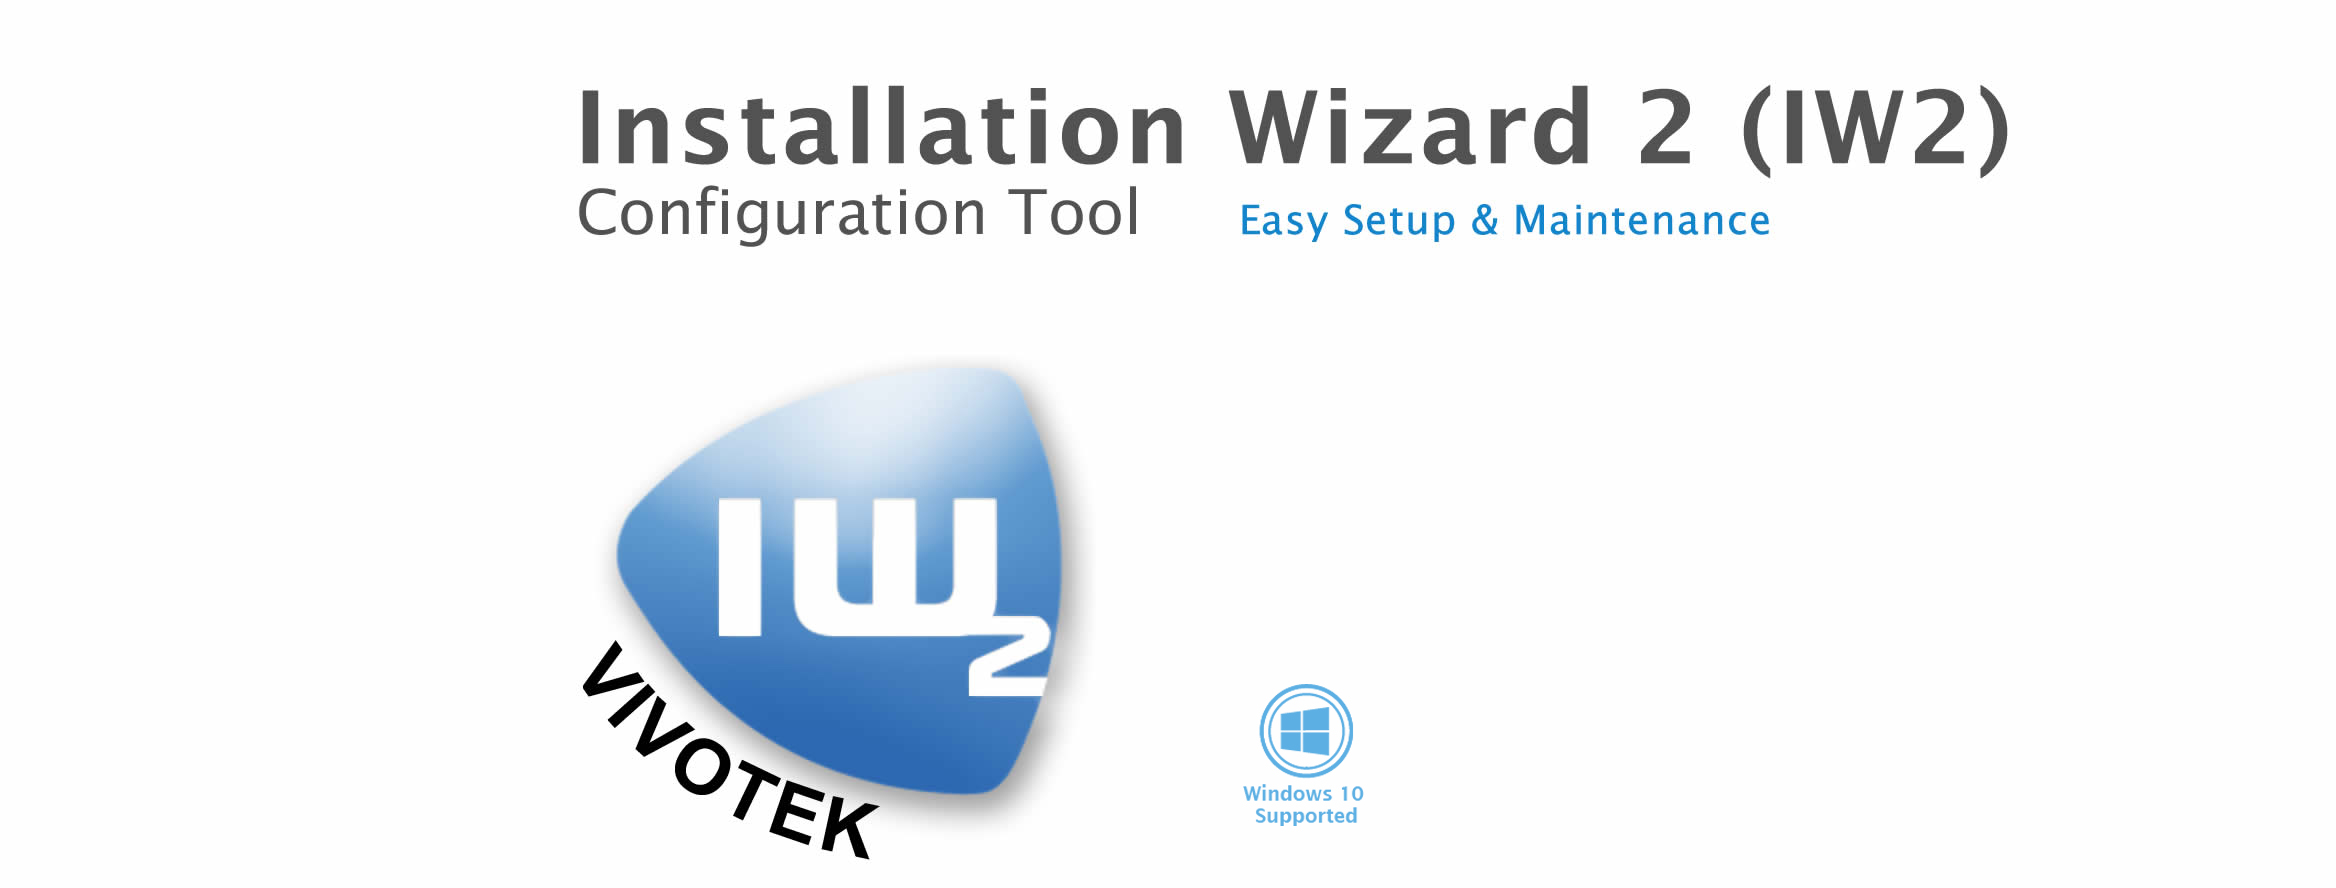 Installation > Overview > Configuration wizards